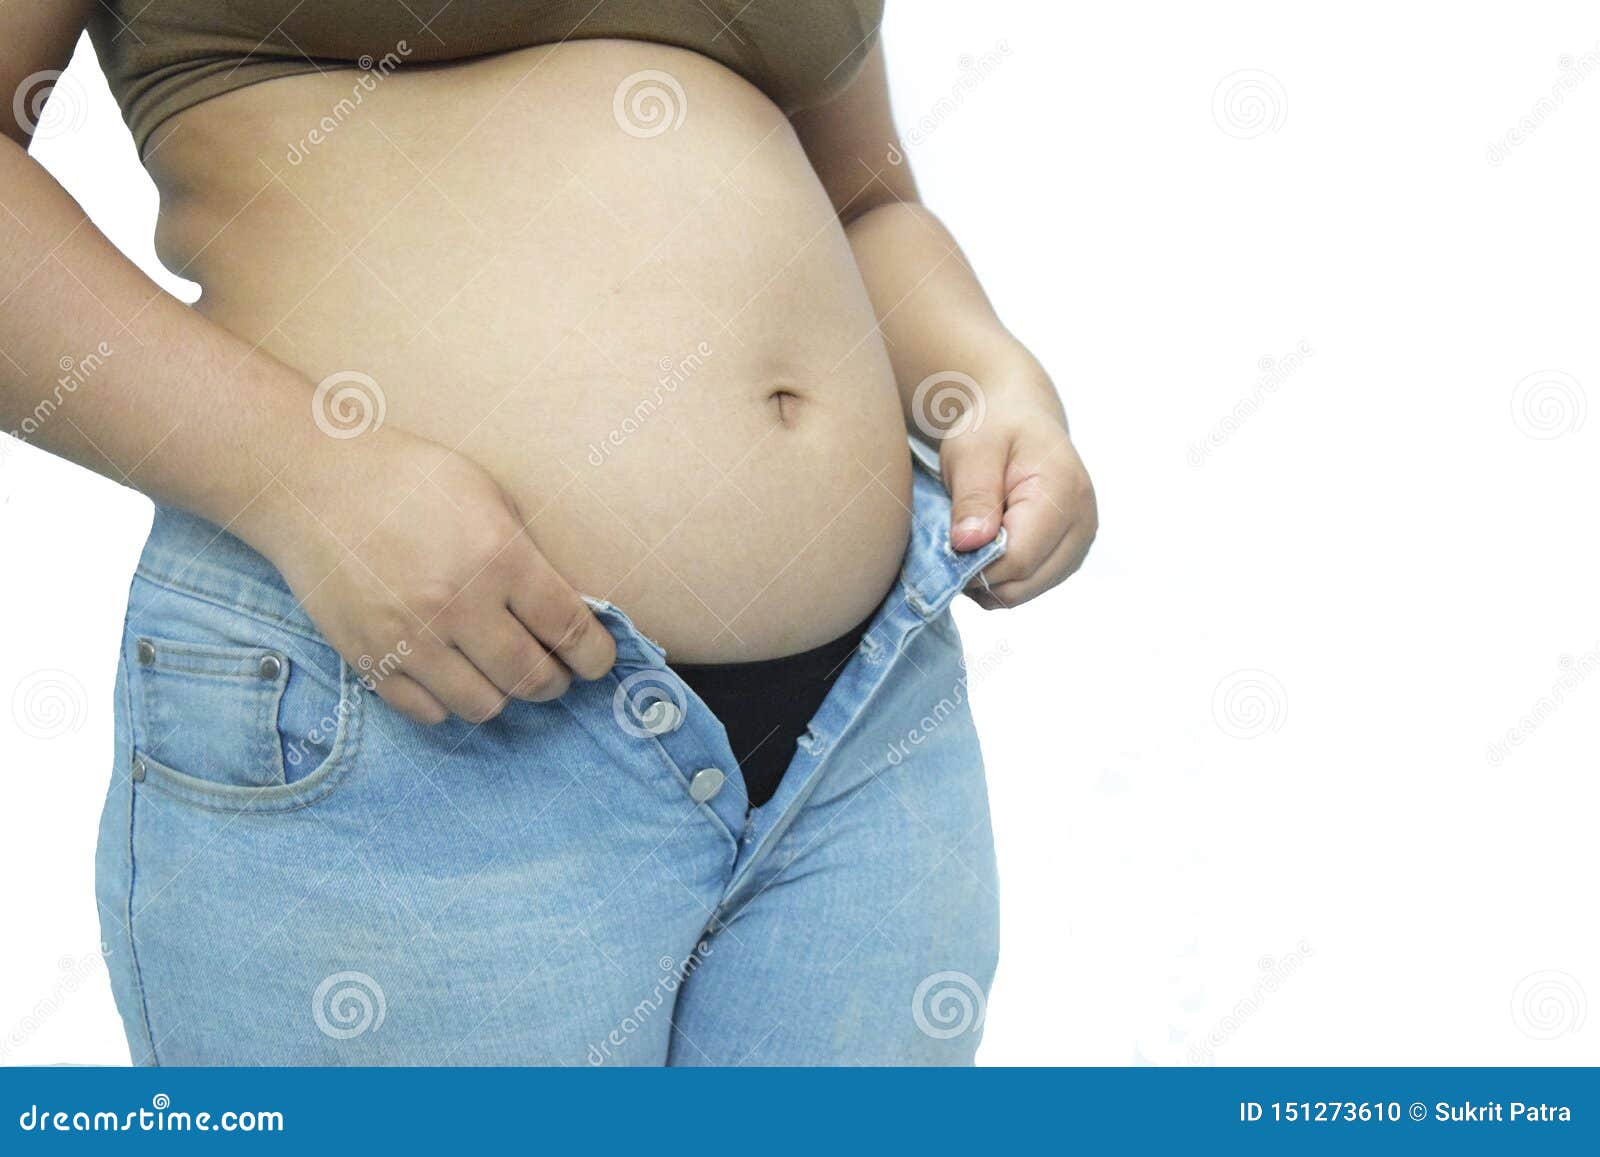 Asian Women are Overweight. she Has Excess Fat Around Her Stomach